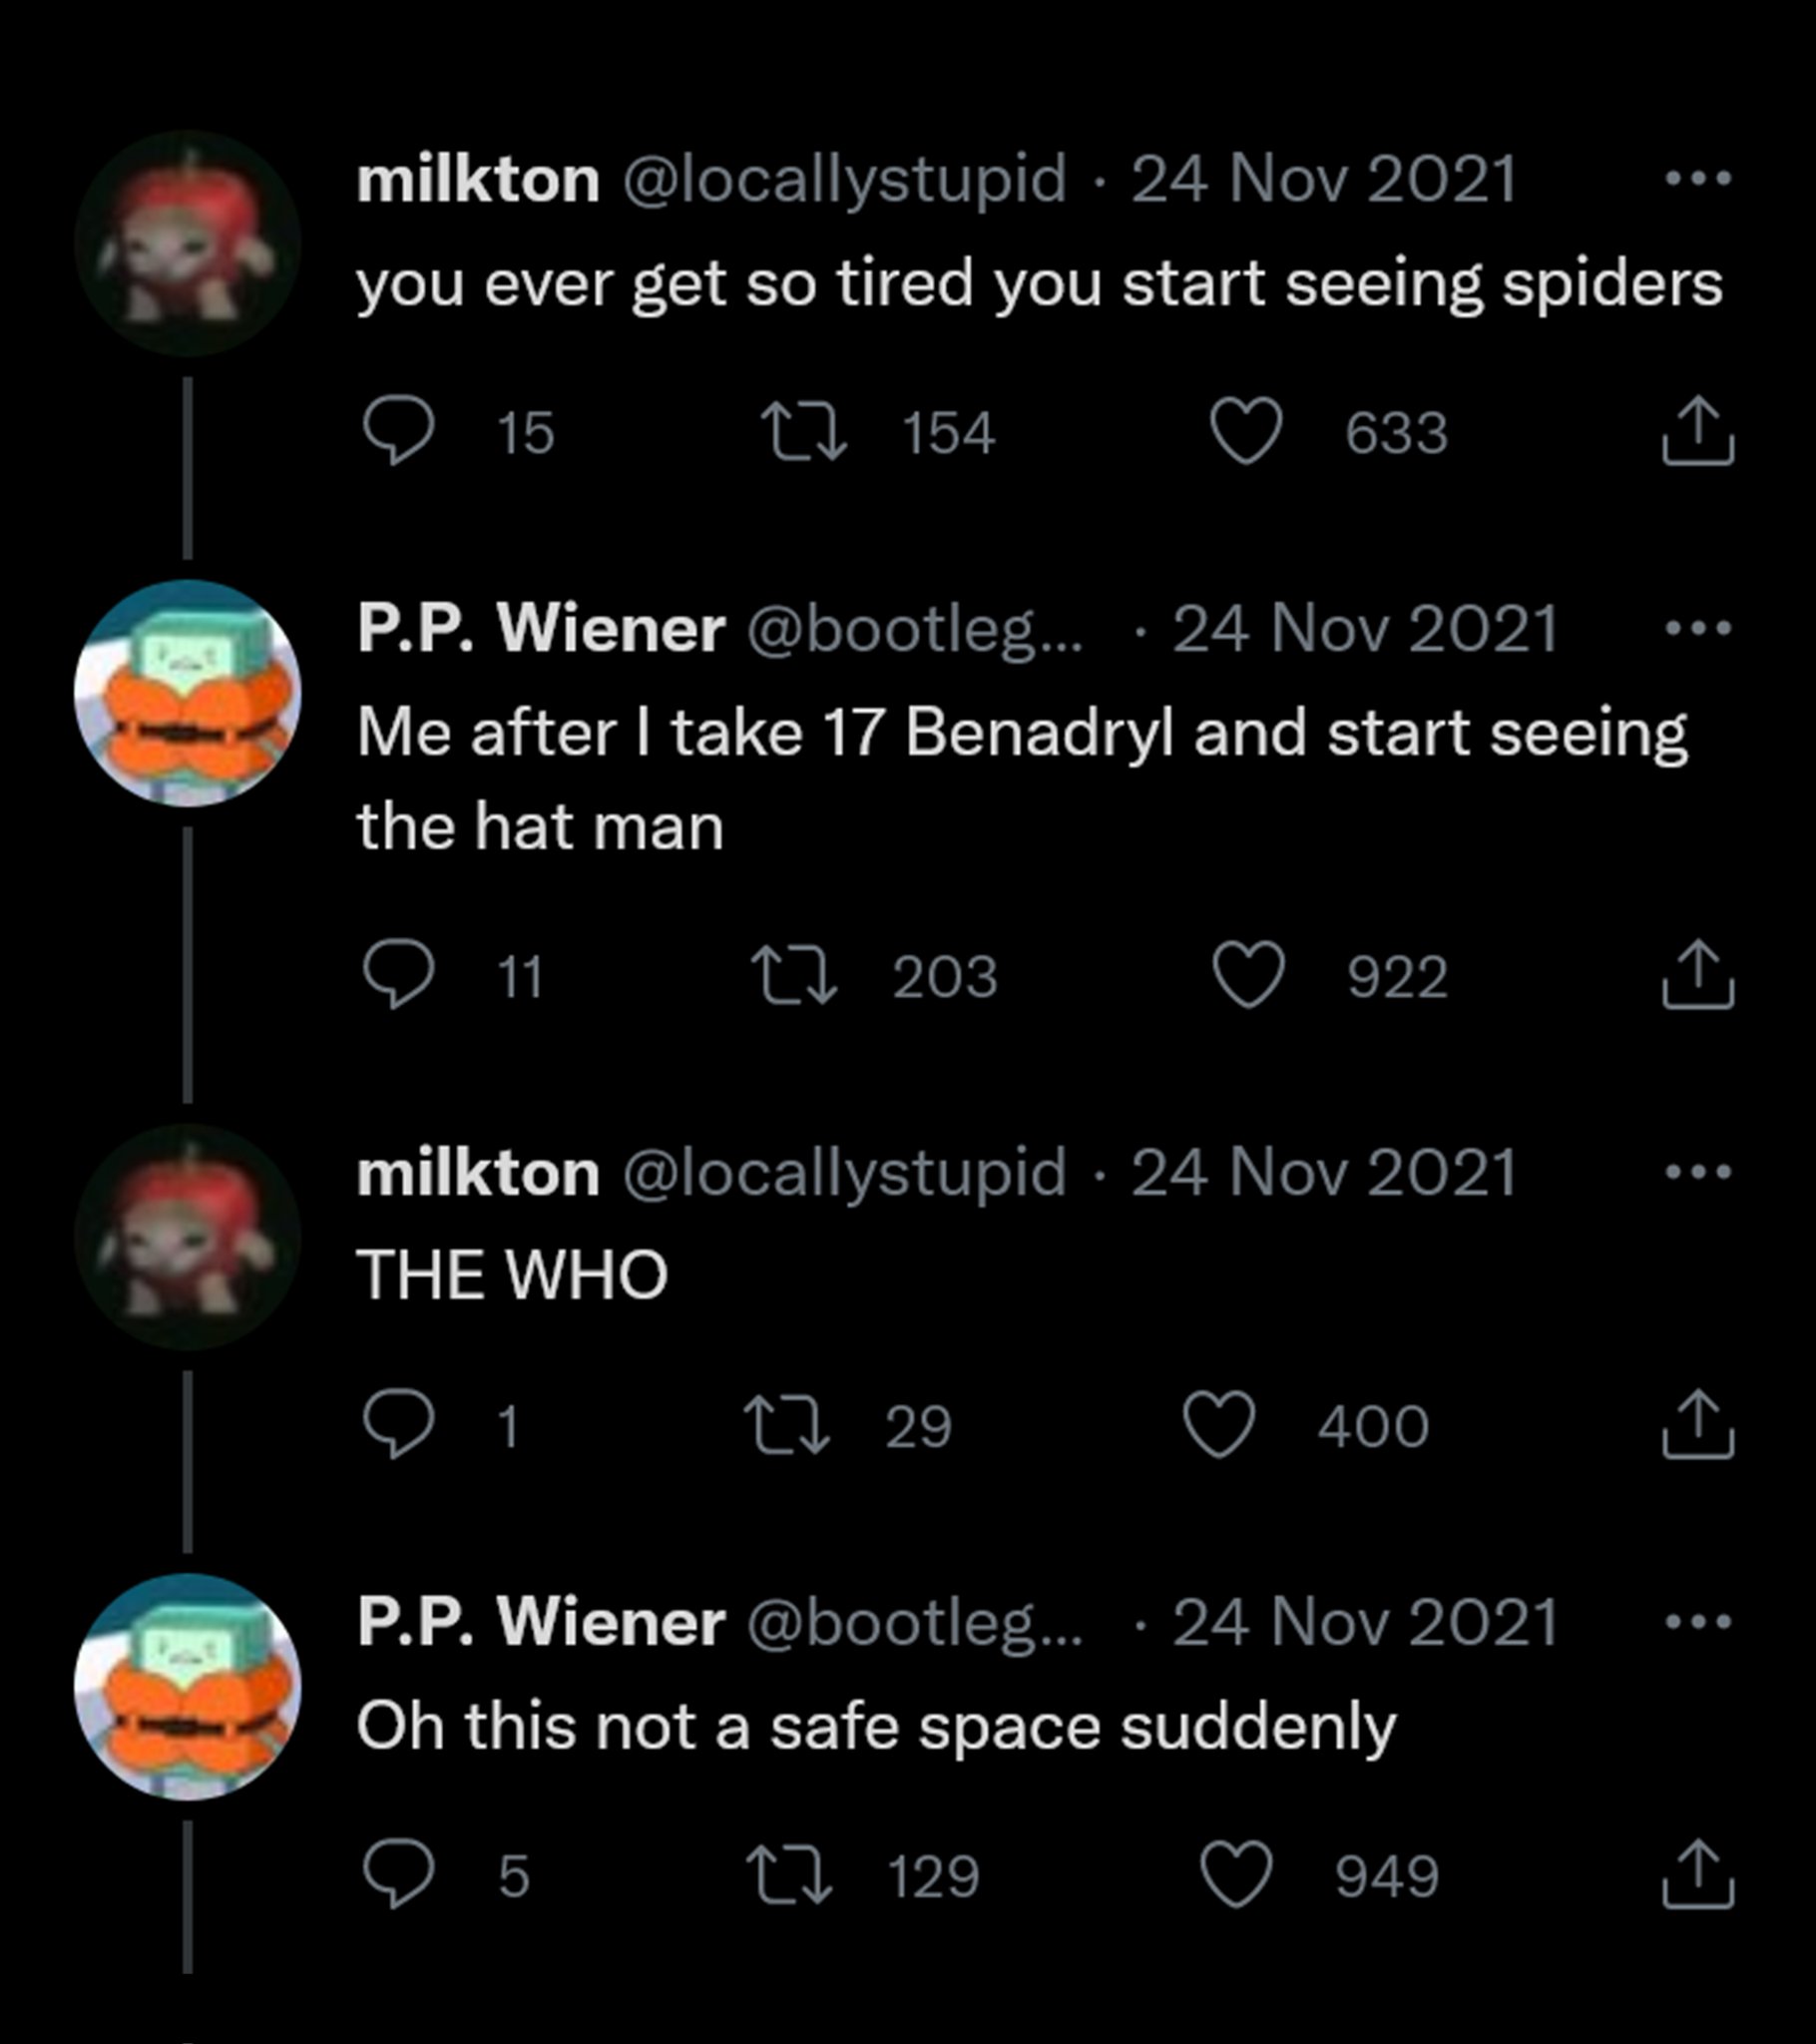 Best Tweets of All Time - hat man twitter - milkton you ever get so tired you start seeing spiders 15 11 154 P.P. Wiener ... Me after I take 17 Benadryl and start seeing the hat man 203 5 633 milkton The Who 1 17 29 922 129 P.P. Wiener ... Oh this not a s